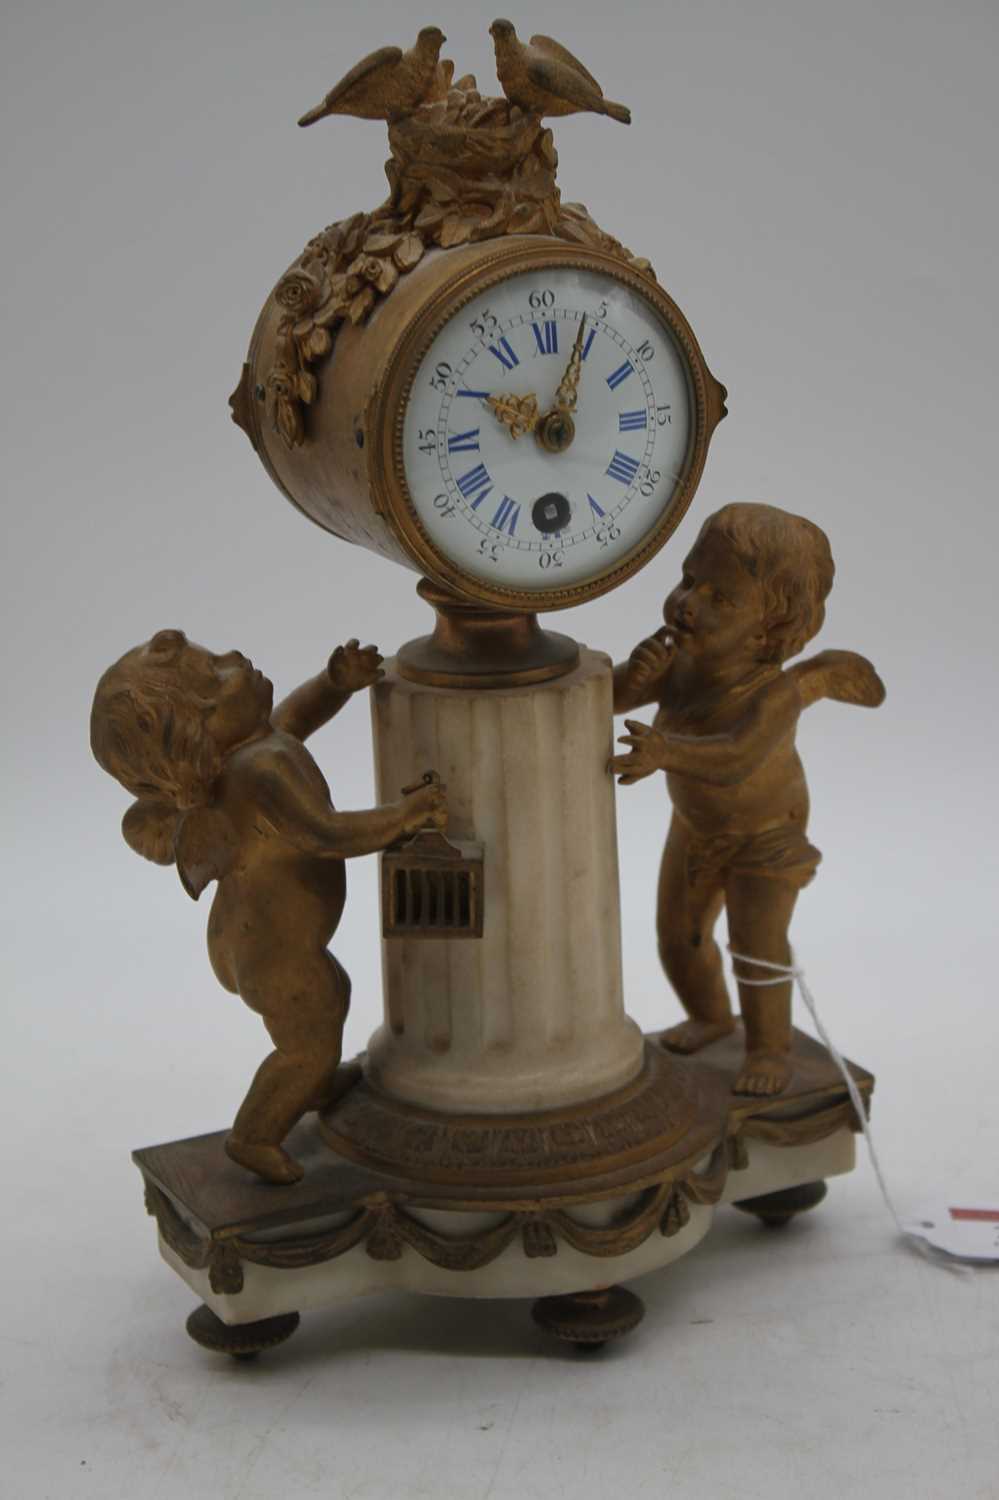 A 19th century French gilt metal figural mantel clock, the enamel dial showing Roman numerals, - Image 2 of 3